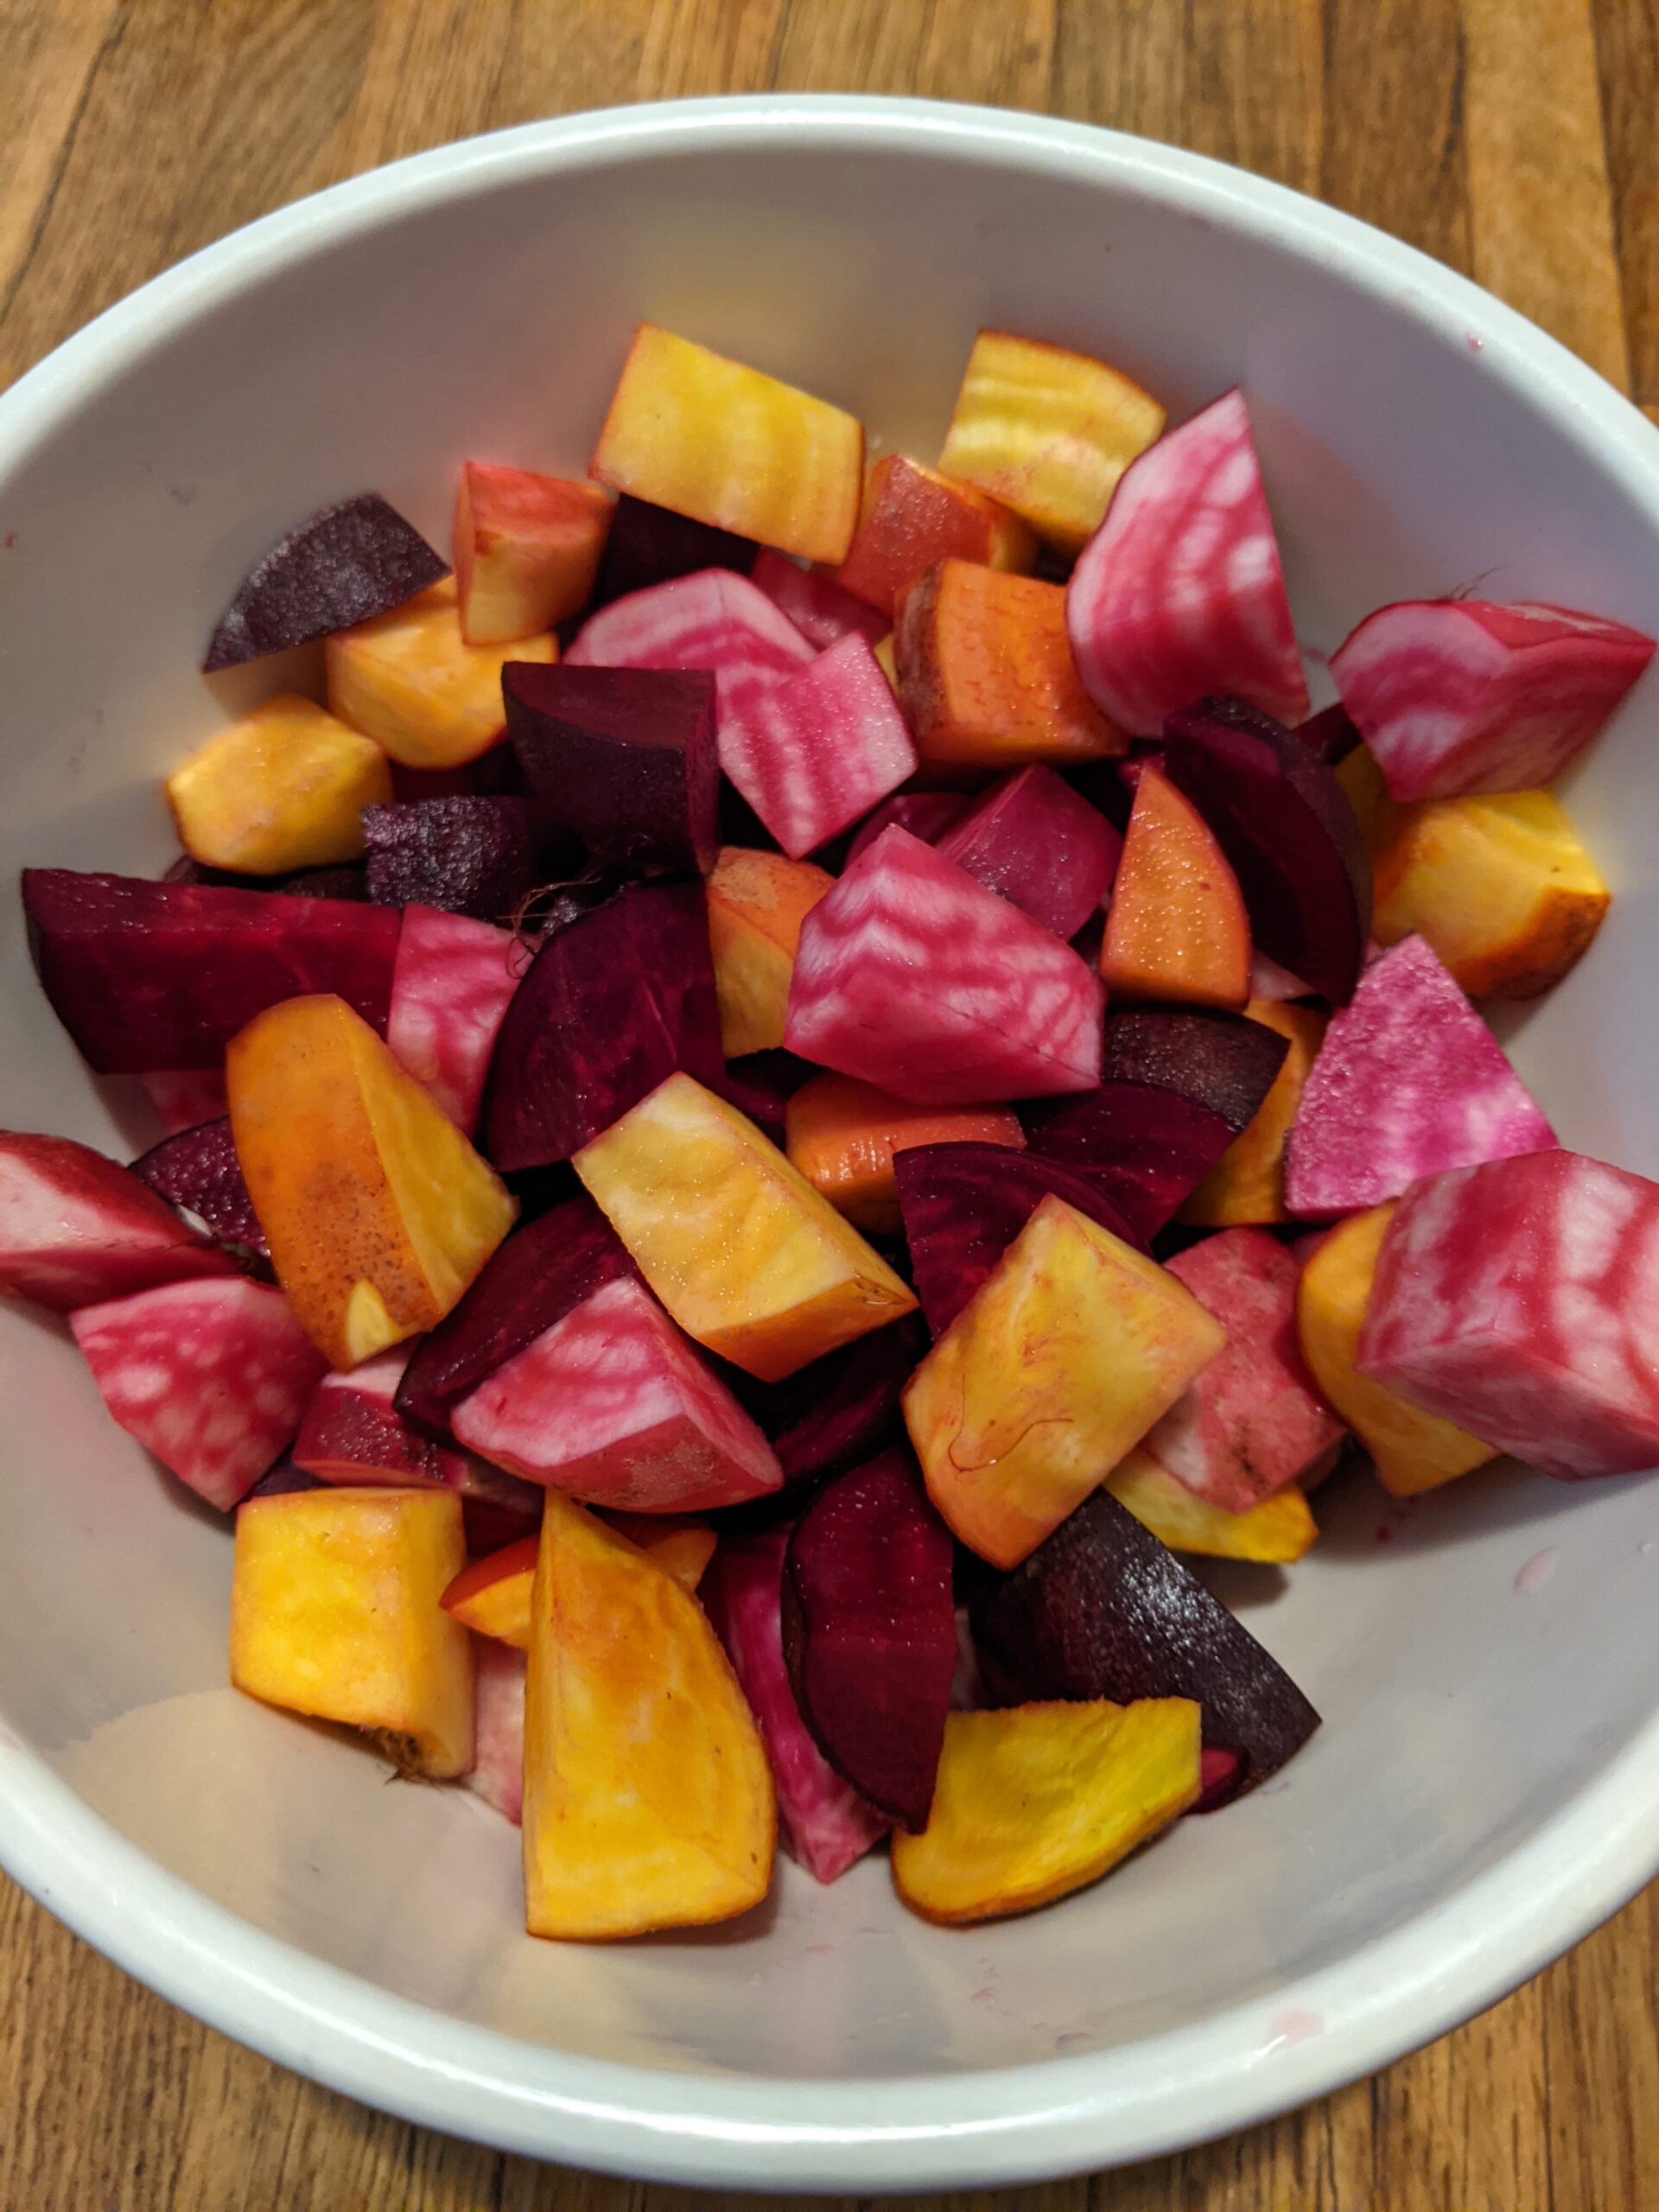 A white bowl holds three different colors of beets: golden, bull's blood red, and chiogga, which has pink and white stripes